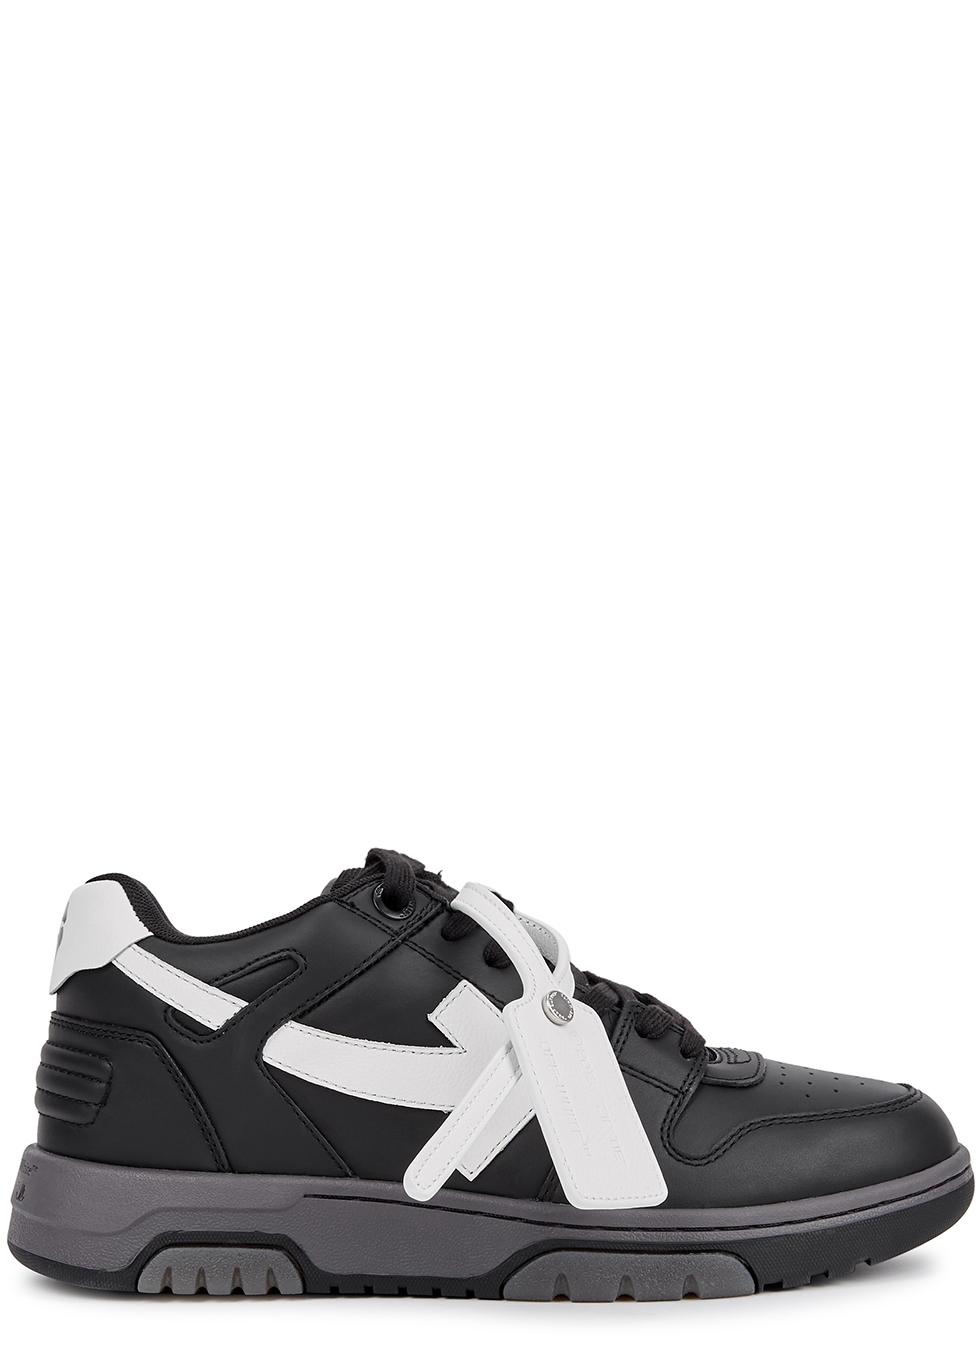 Off-White Out Of Office black leather sneakers - Harvey Nichols